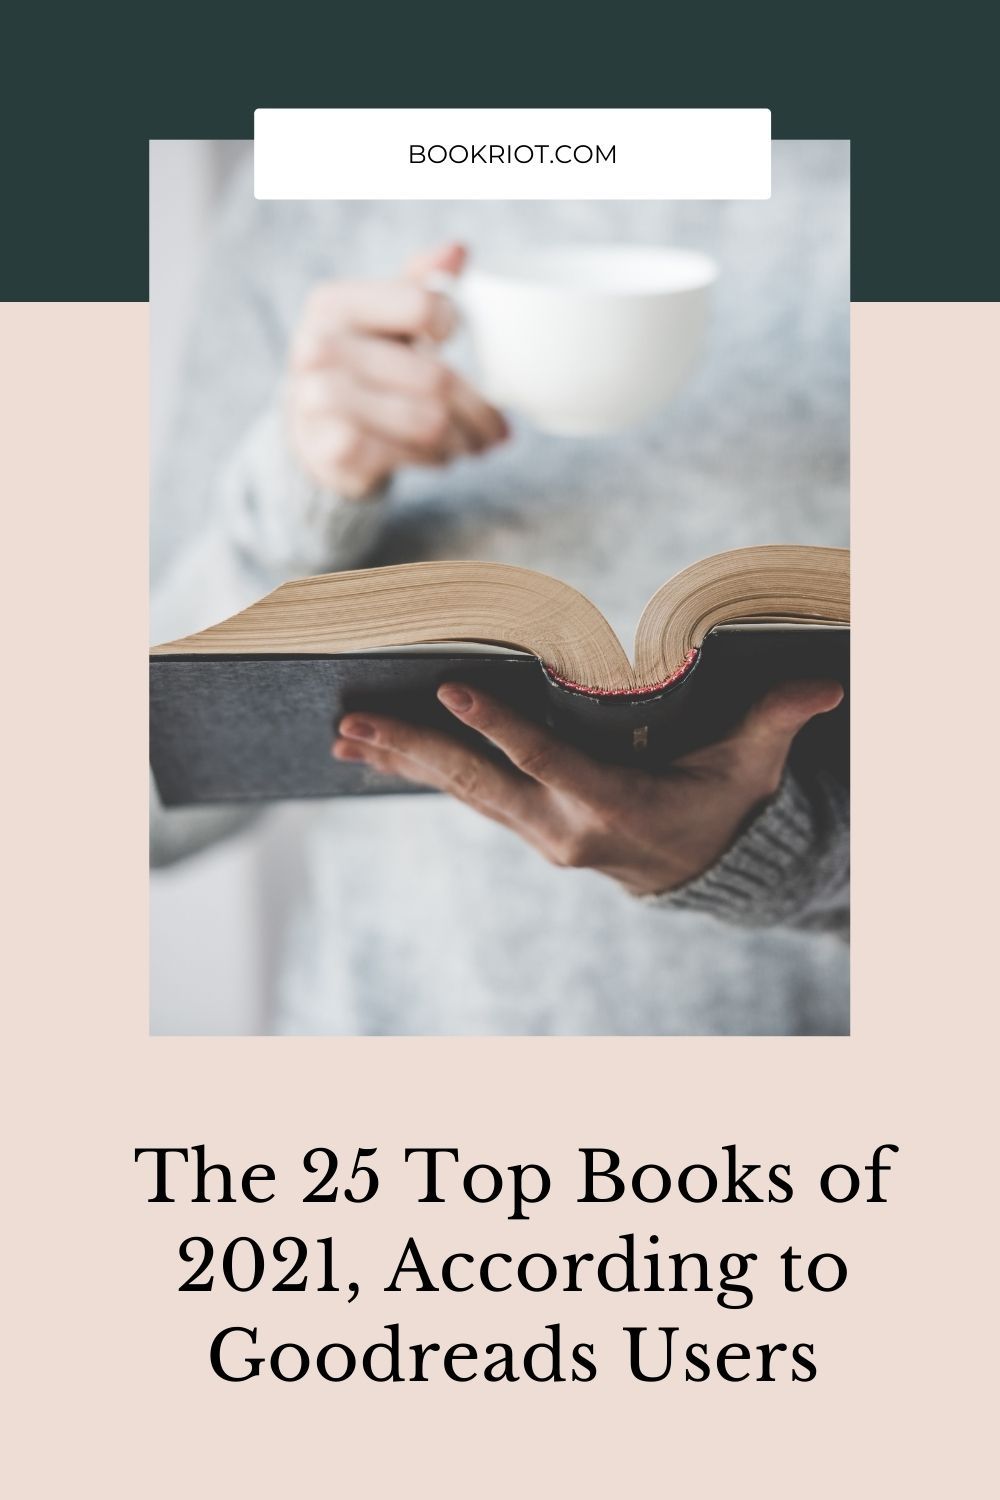 The 25 Top Books Of 2021, According To Goodreads Users Book Riot